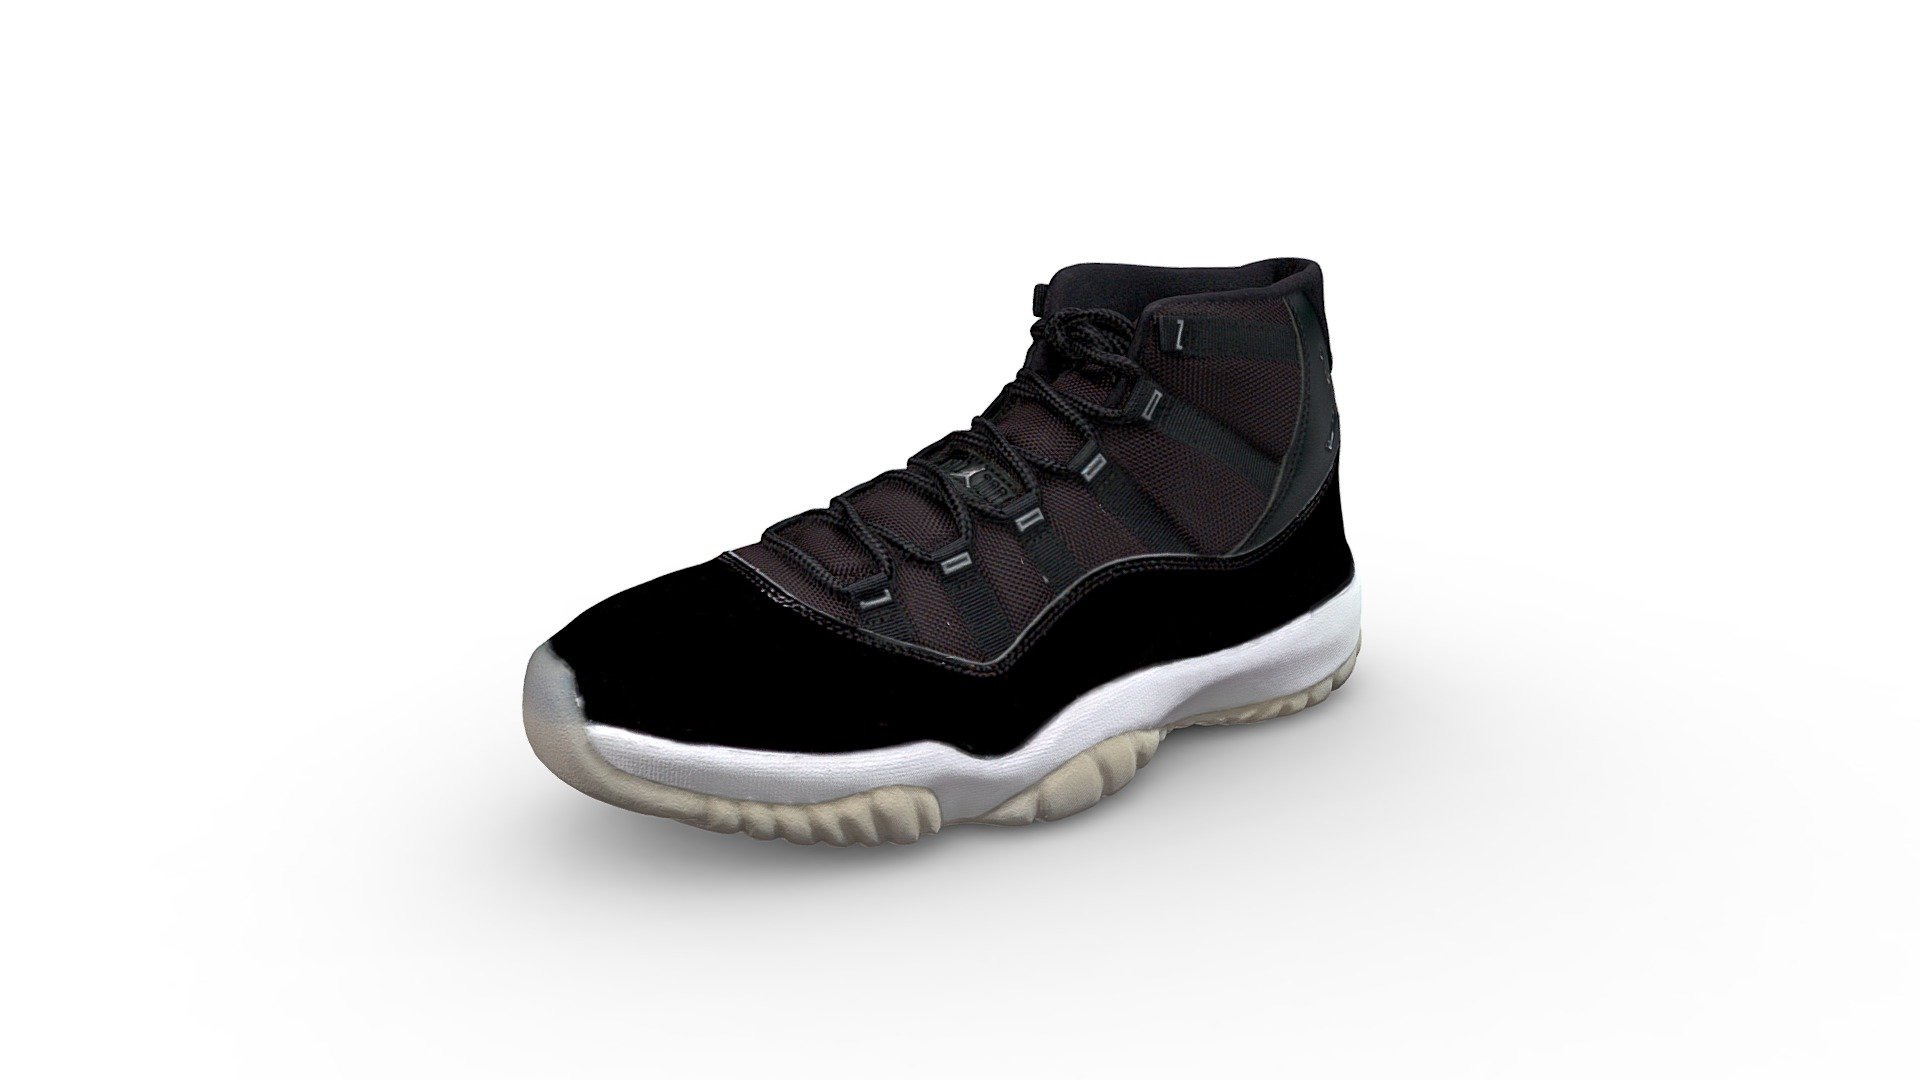 3D Scan of an Air Jordan 11 Retro 2020

The Air Jordan 11 has become a tradition in the eyes of sneakerheads and the basketball community as Jordan Brand has commemorated a colorway with an exclusive Holiday release for a number of years. The patent leather combined with the mesh has been the canvas for a handful of timeless colorways. Holiday 2020 appears to feature another AJ11 as the Air Jordan 11 “25th Anniversary” is set to release later this year in celebration of the shoe’s 1995 release 3d model